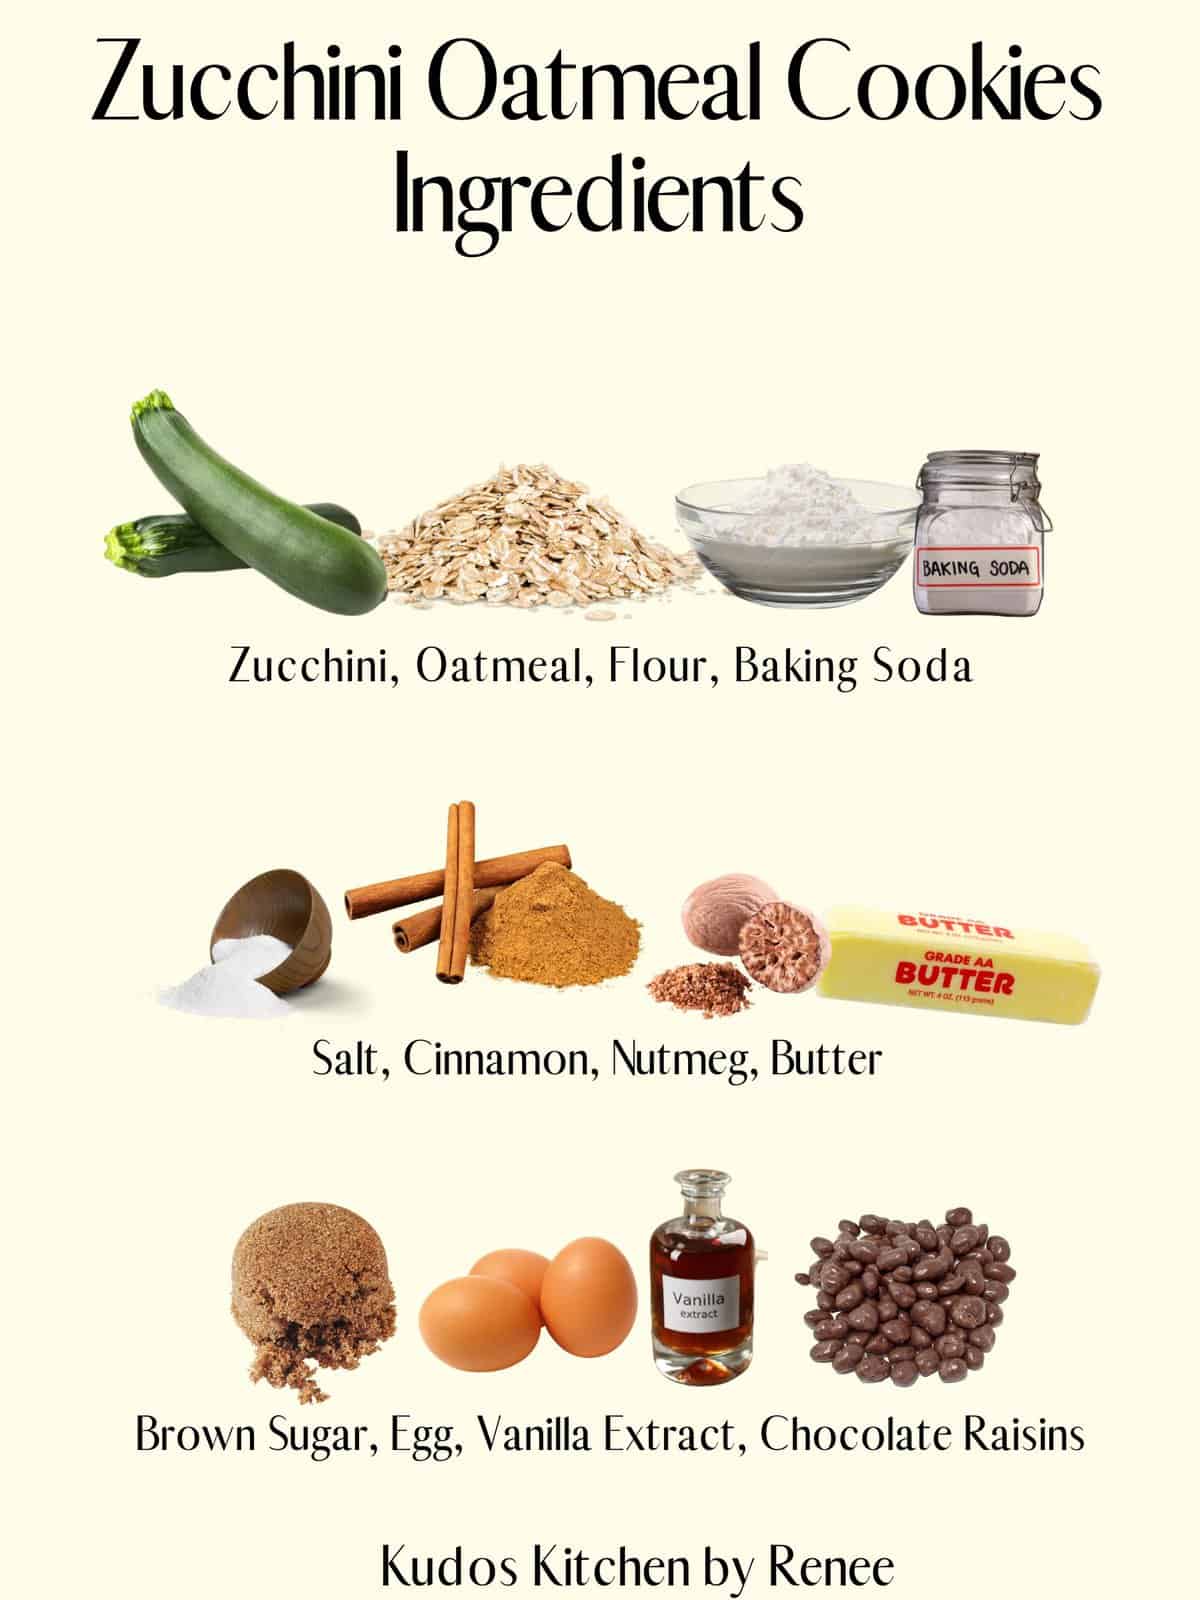 A visual ingredient list for making Zucchini Oatmeal Cookies with Chocolate Covered Raisins.